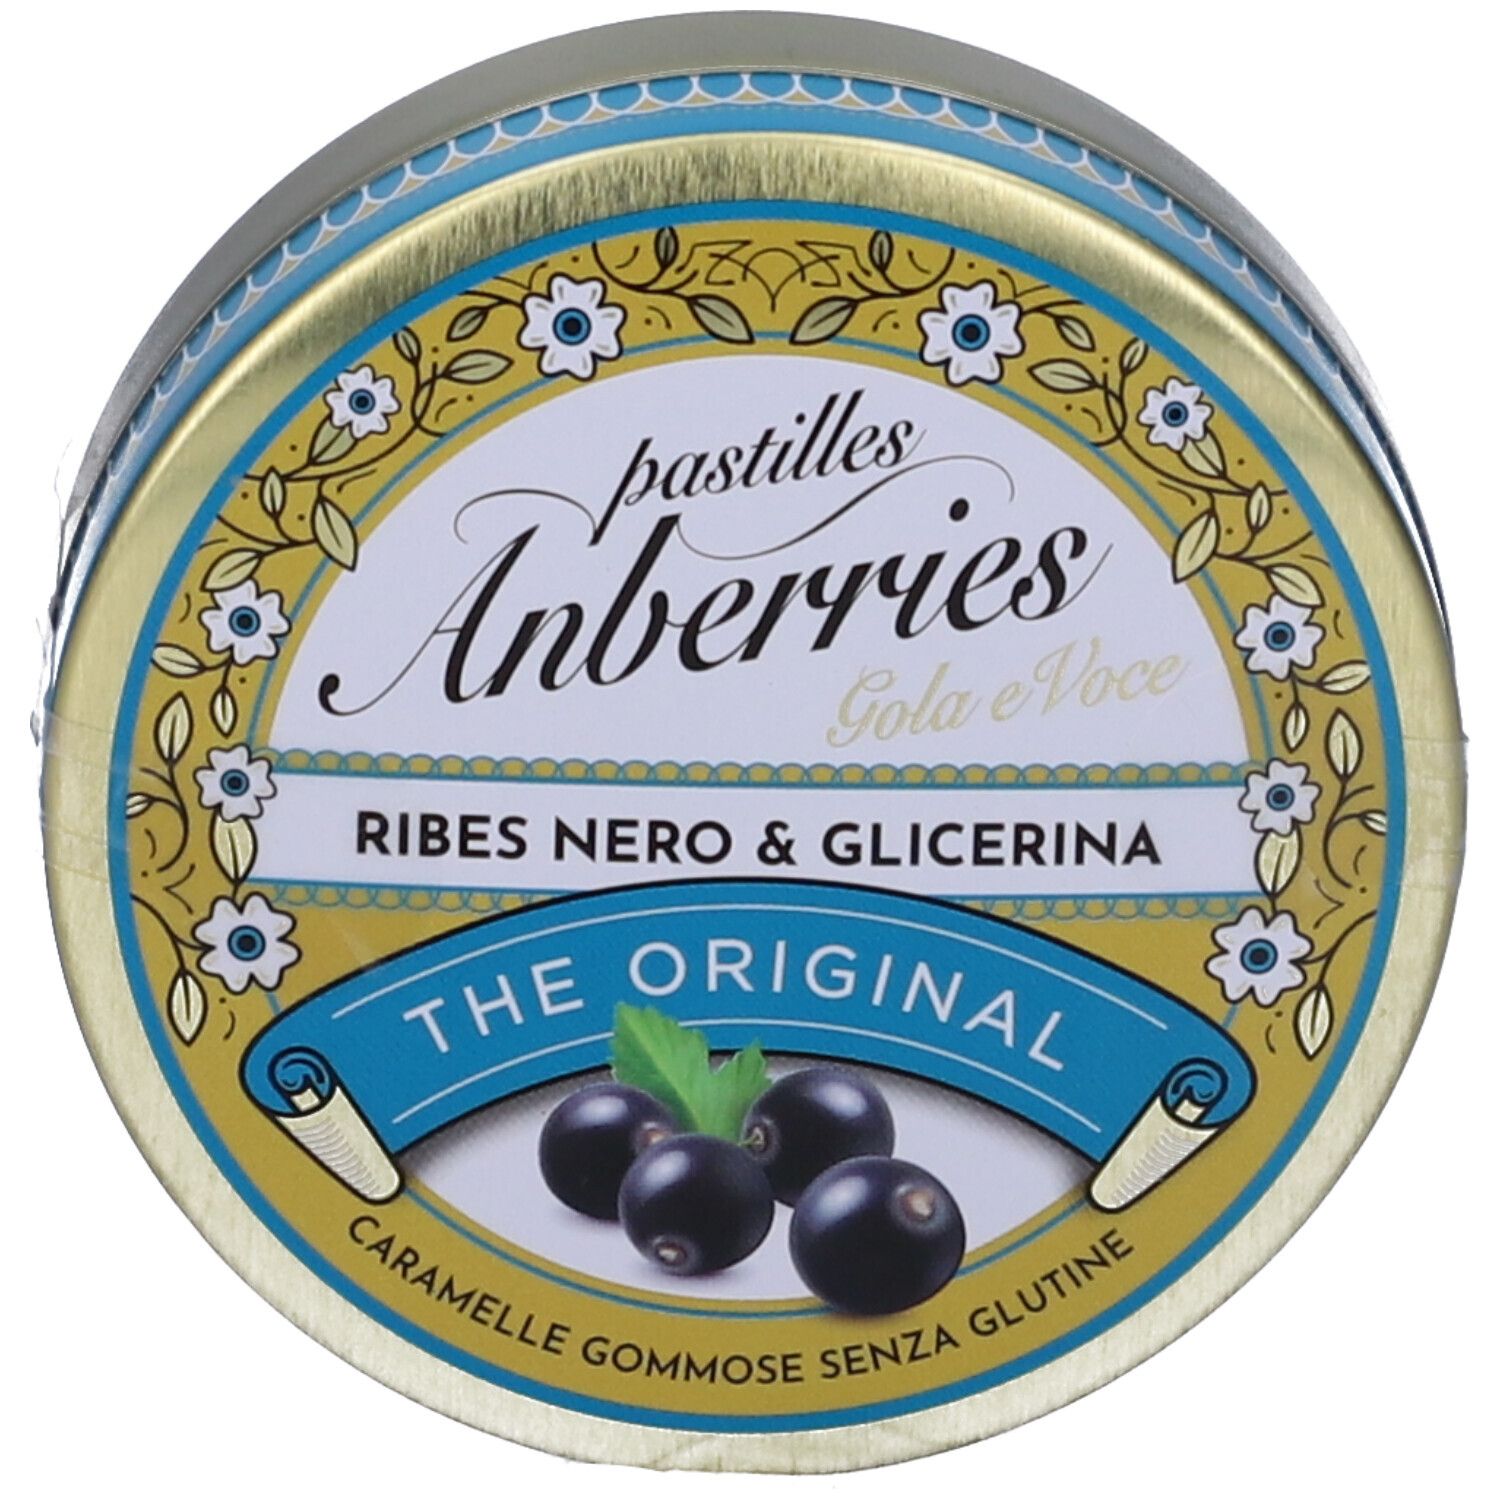 Pastilles Anberries Ribes Nero & Glicerina